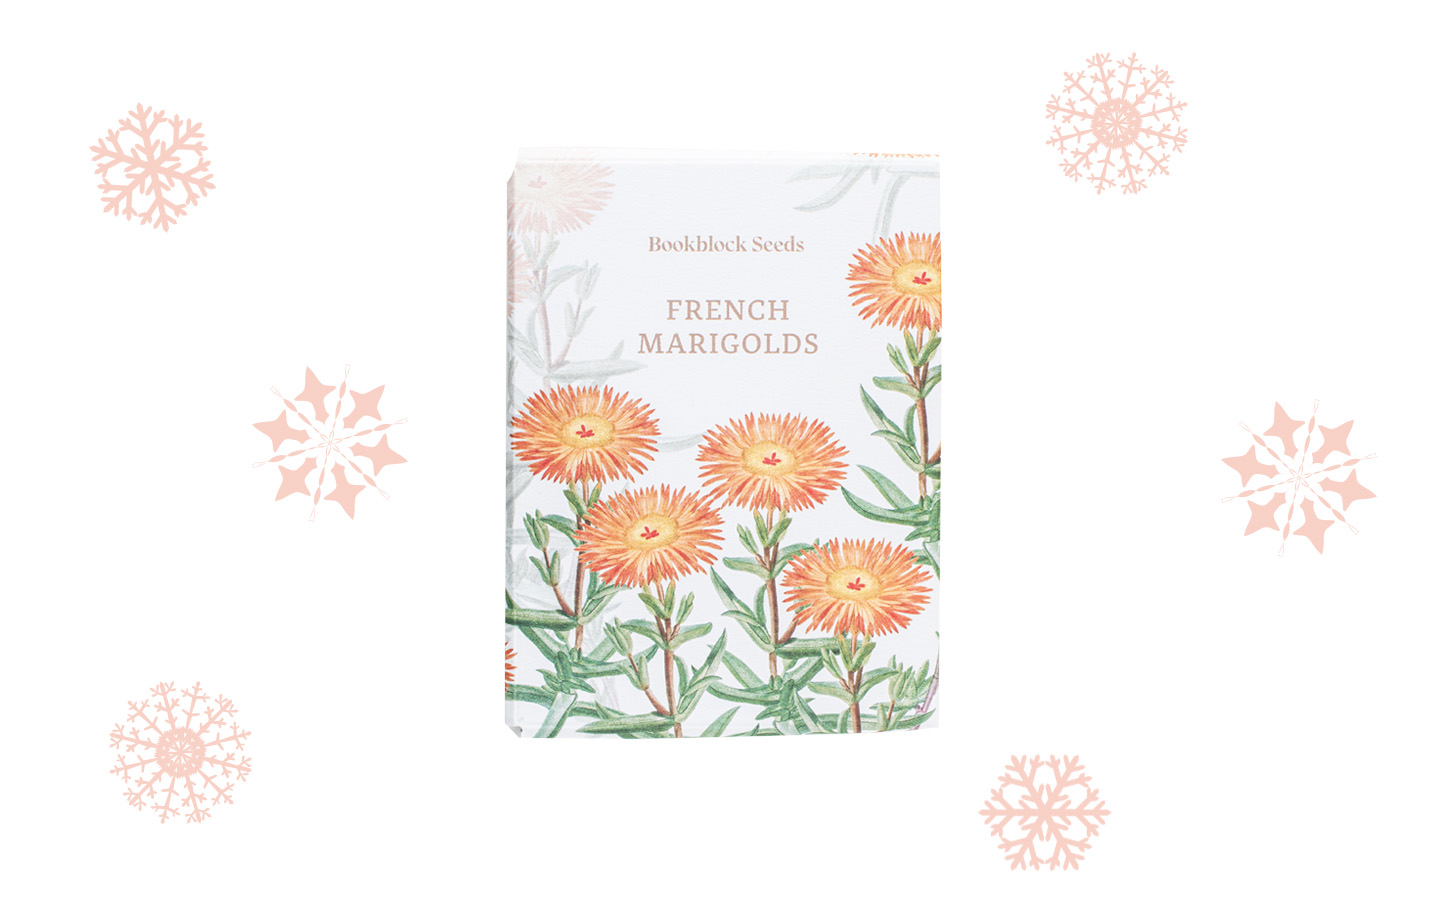 French Marigold Seeds with orange snowflake decorations